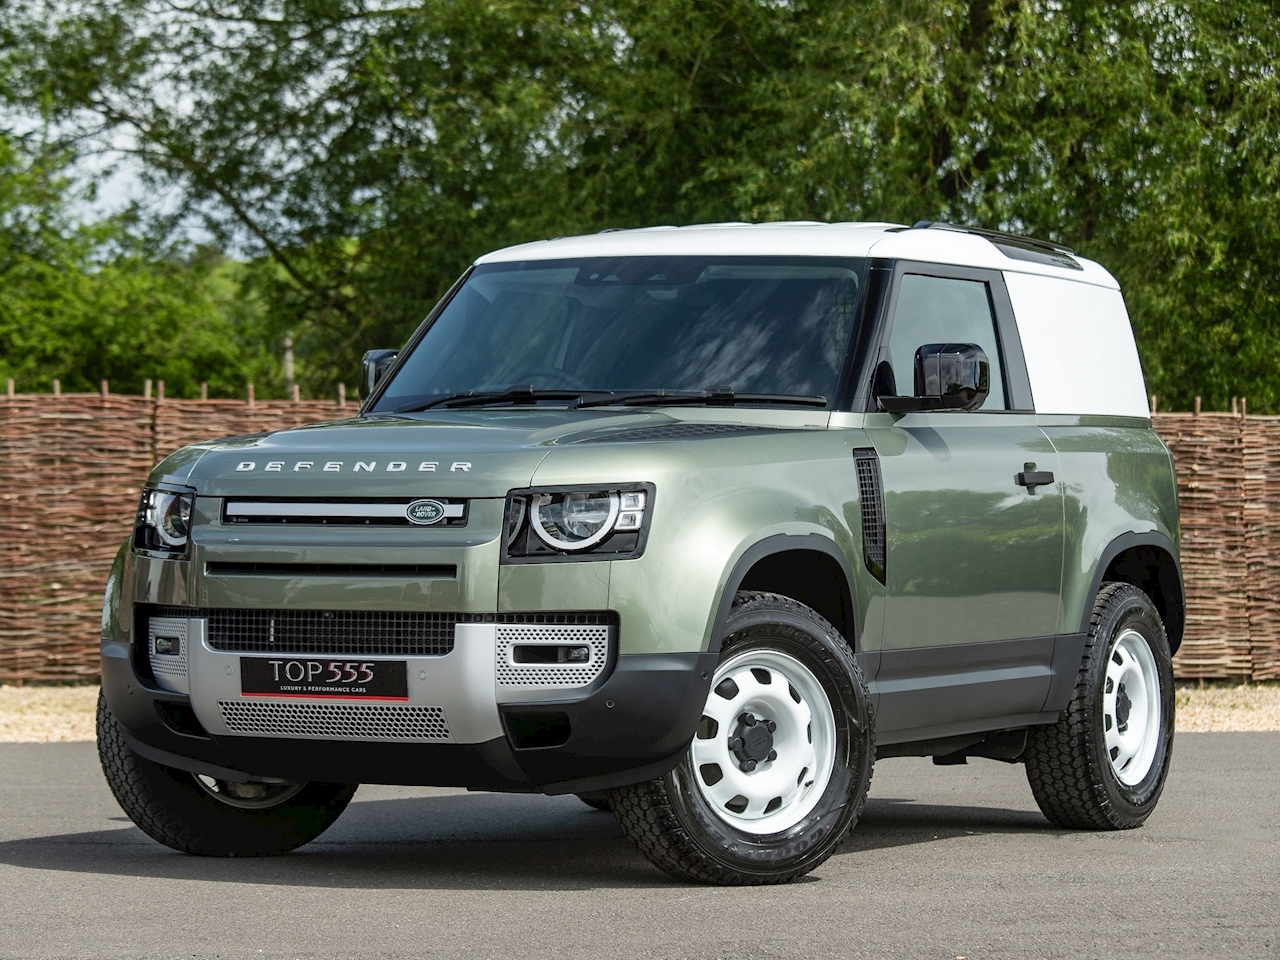 Land Rover Defender 90 launched: Top feature highlights - CarWale